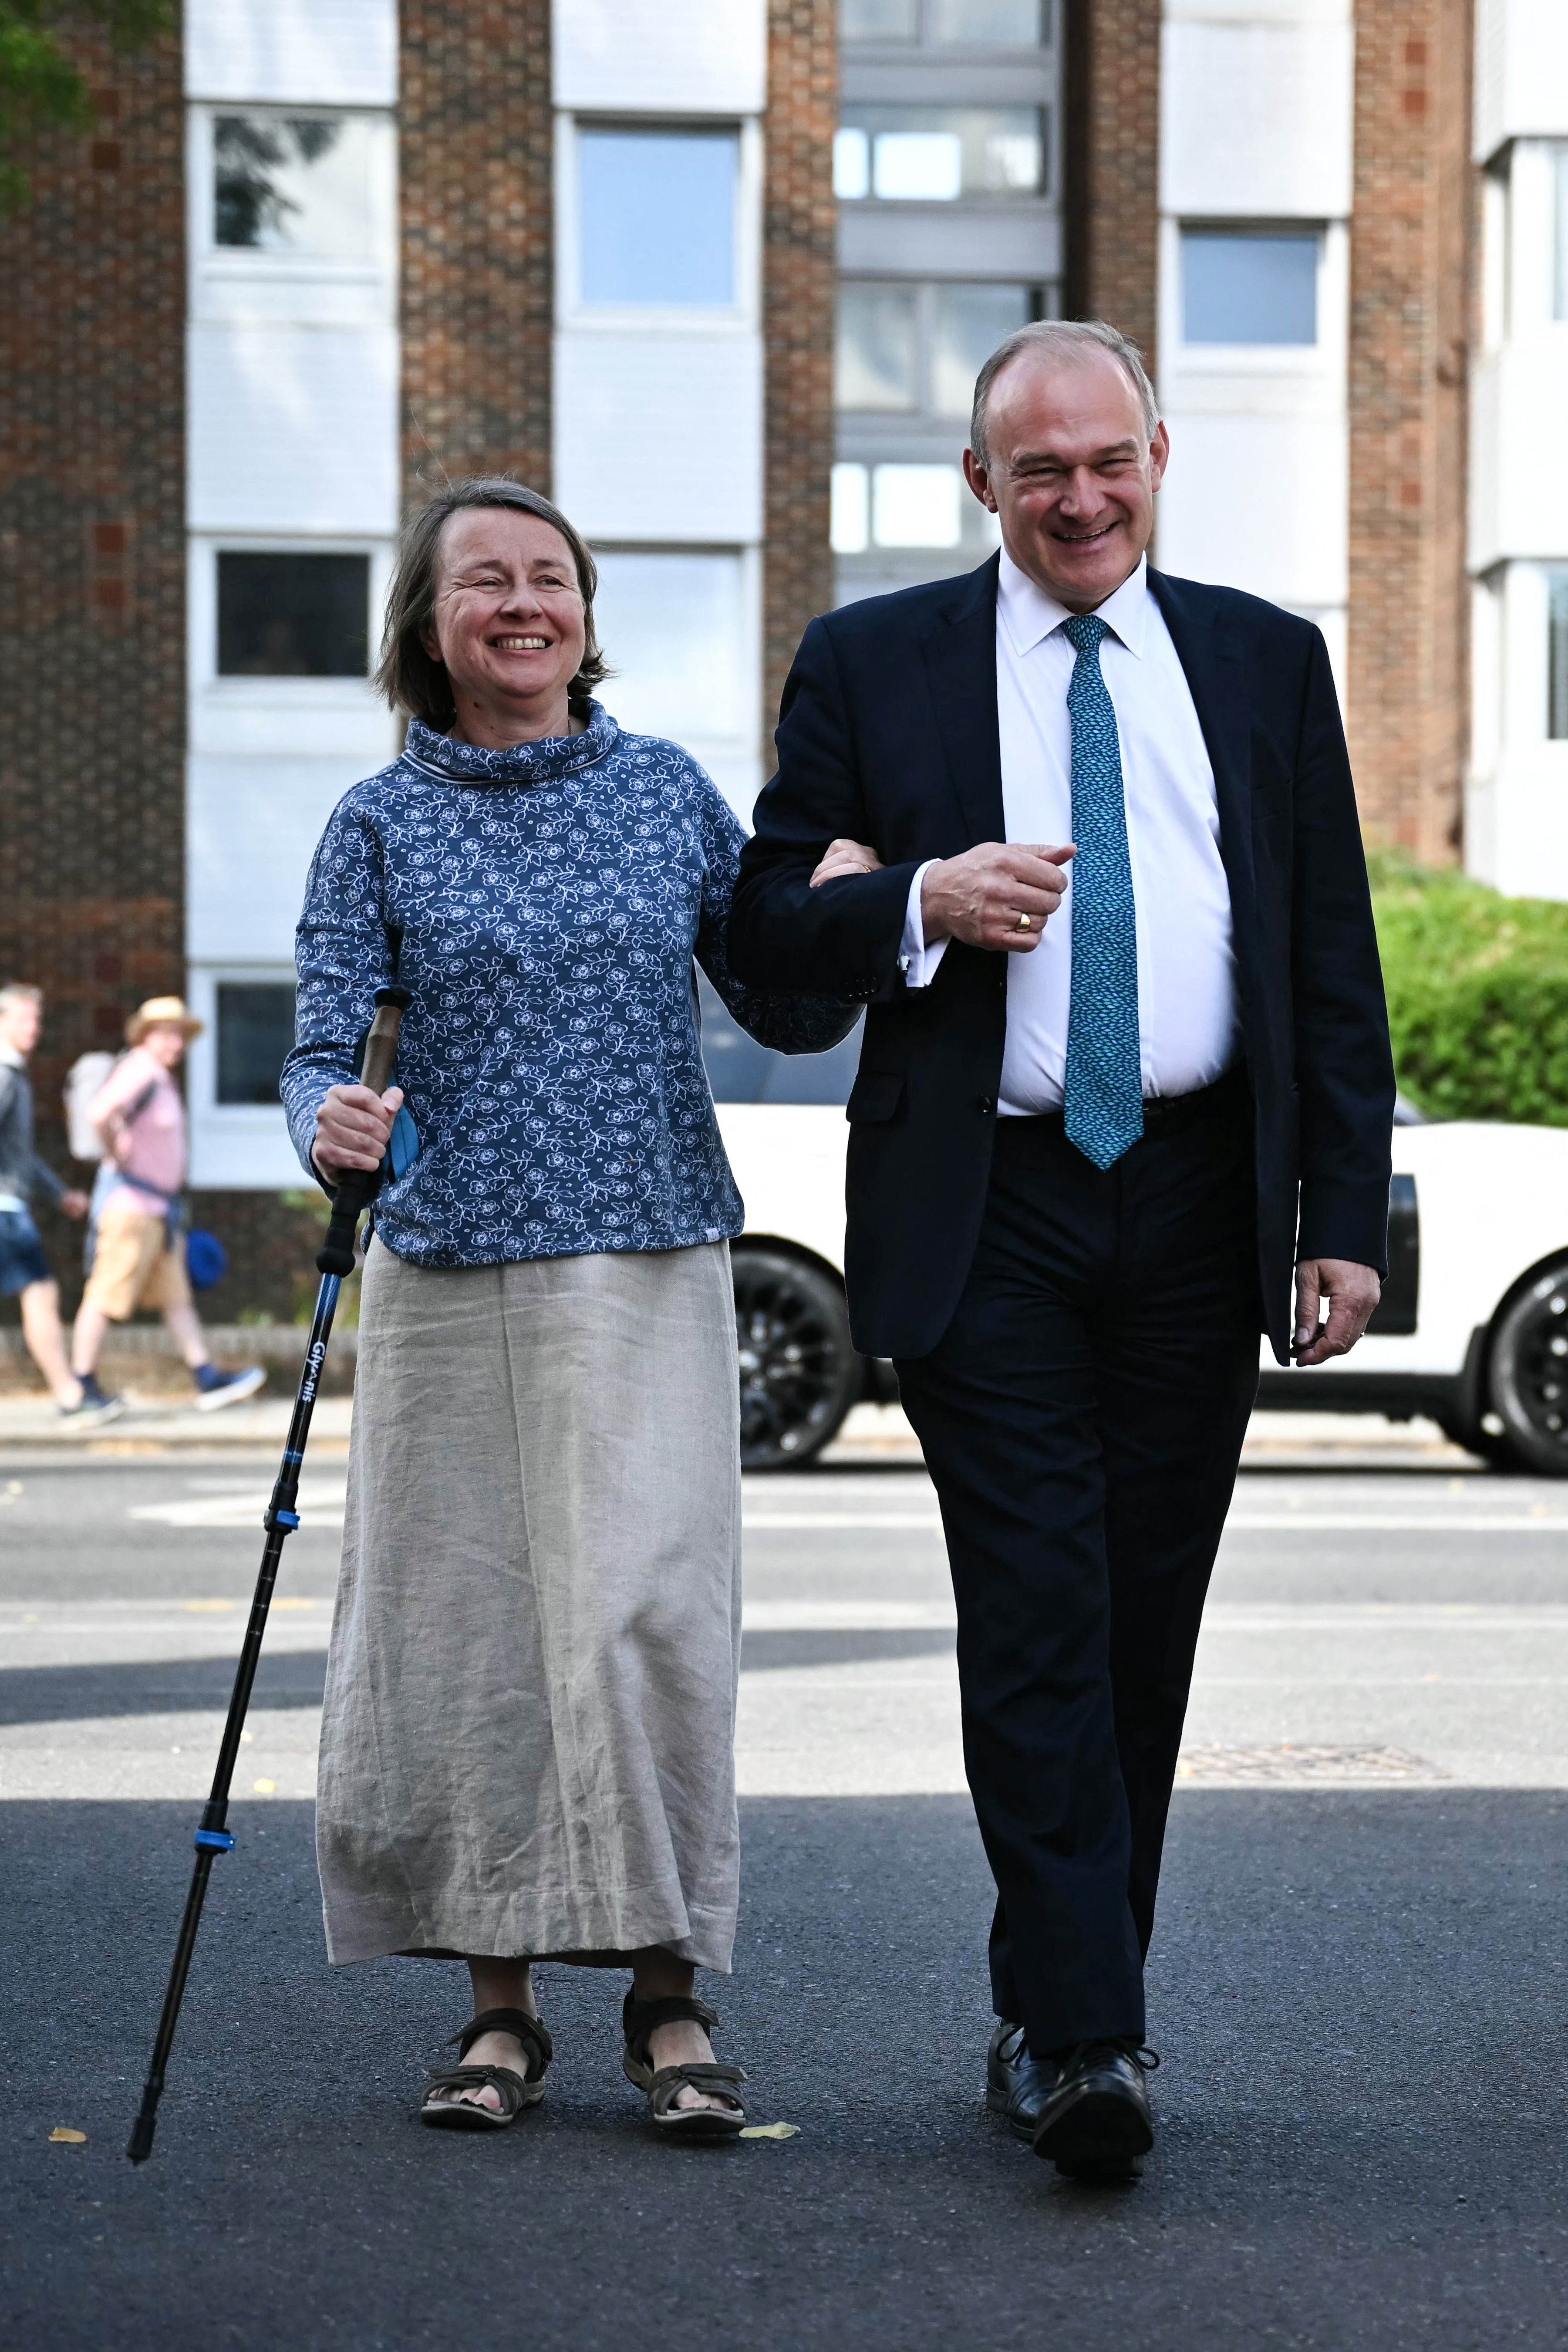 Sir Ed Davey and his wife Emily Gasson arrive to cast their votes in the 2024 General Election at Surbiton Hill Methodist Church in Surbiton, south west London